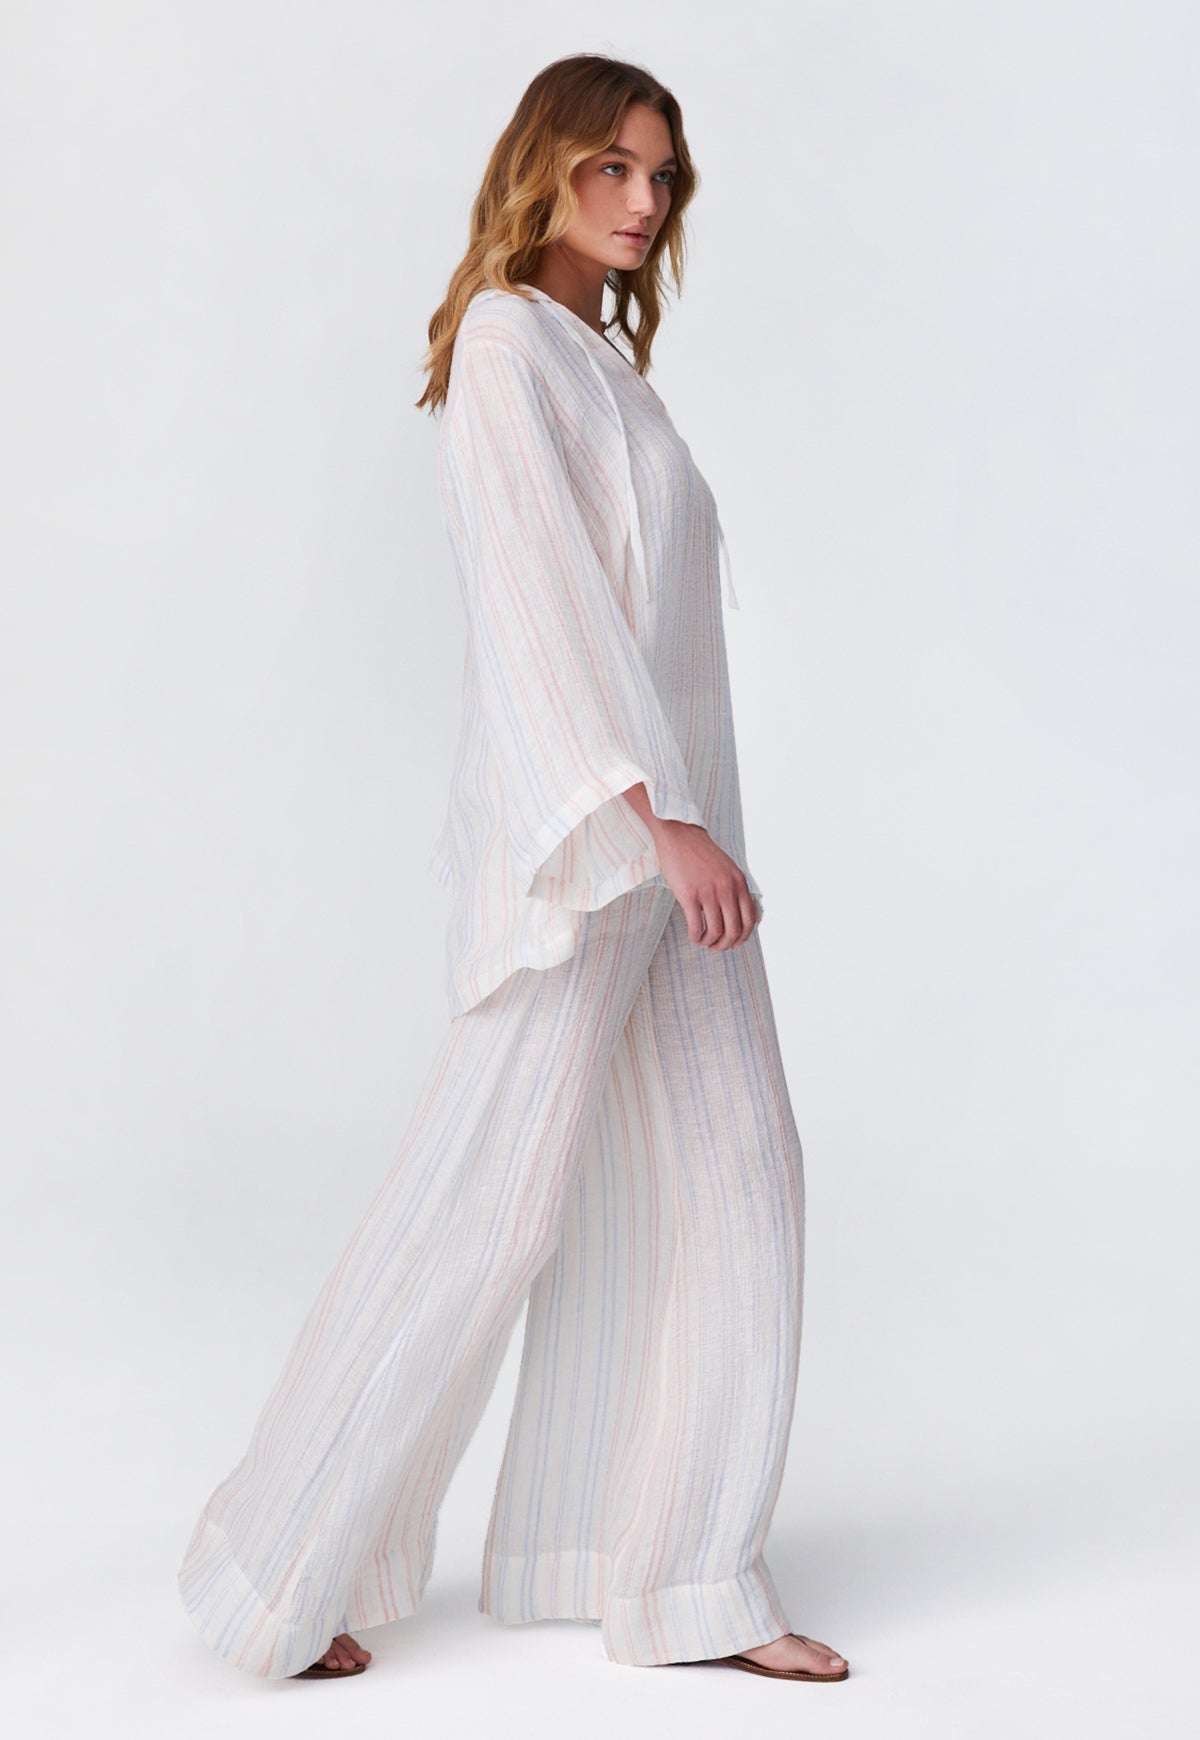 THE LOW-WAIST WIDE LEG PANT  in WHITE & PINK & BLUE STRIPED GAUZE